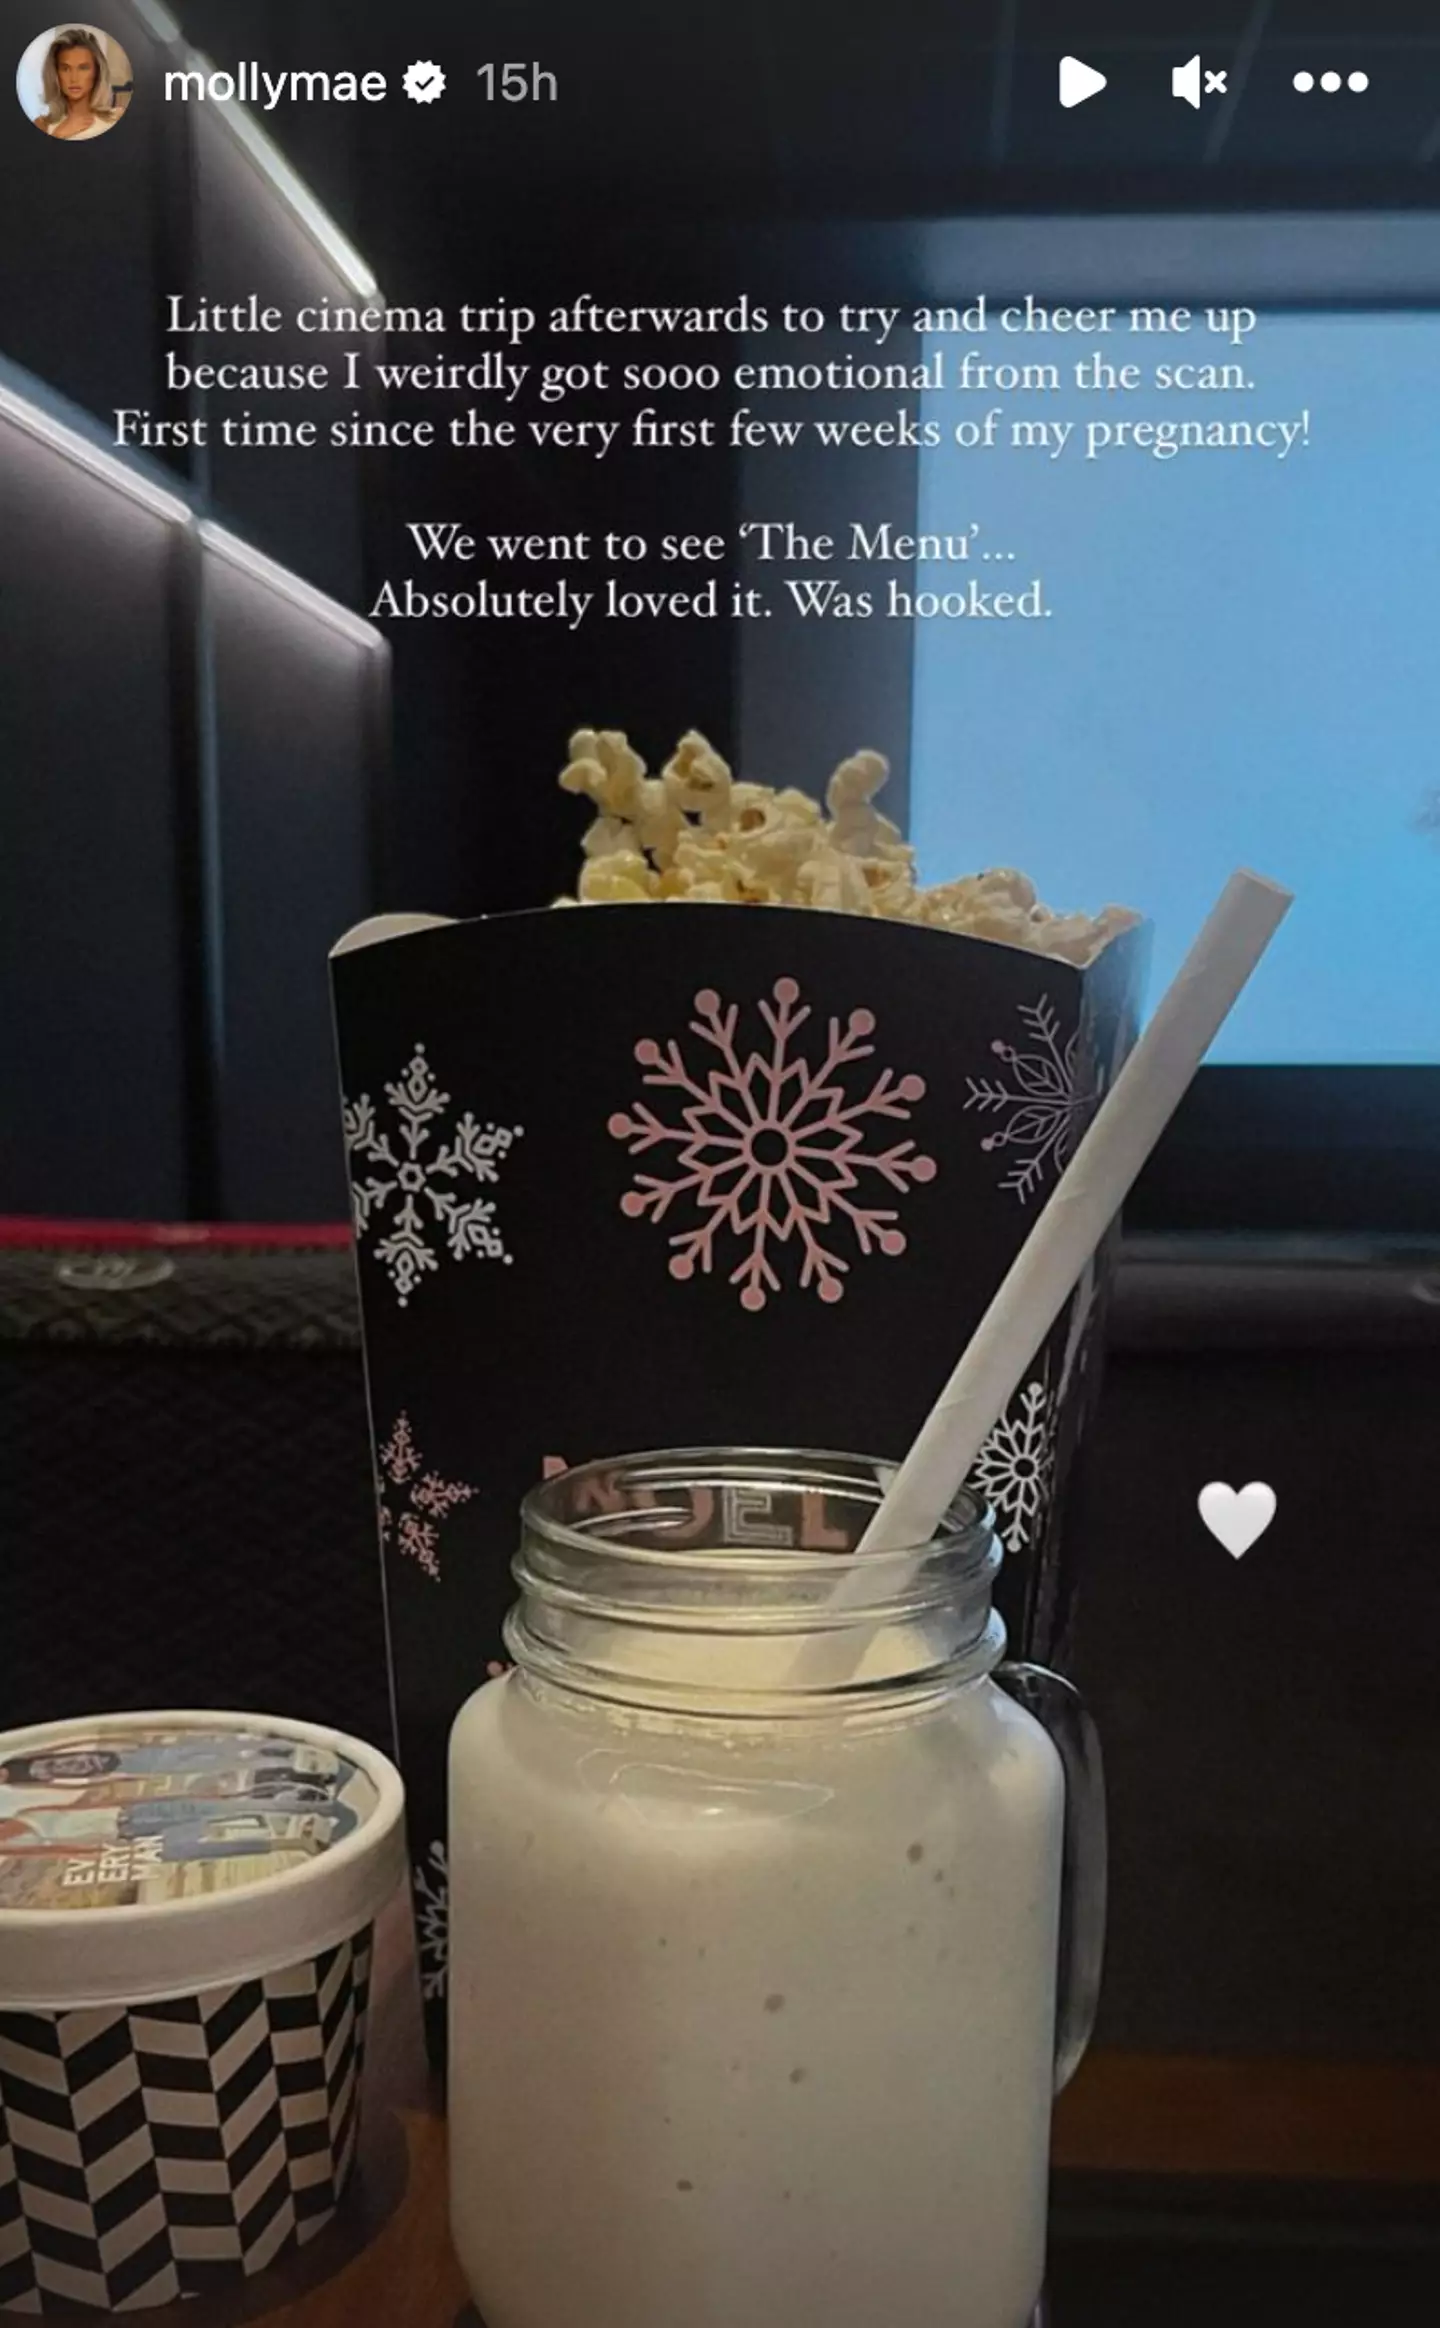 Molly-Mae and Tommy went to the cinema after the scan.